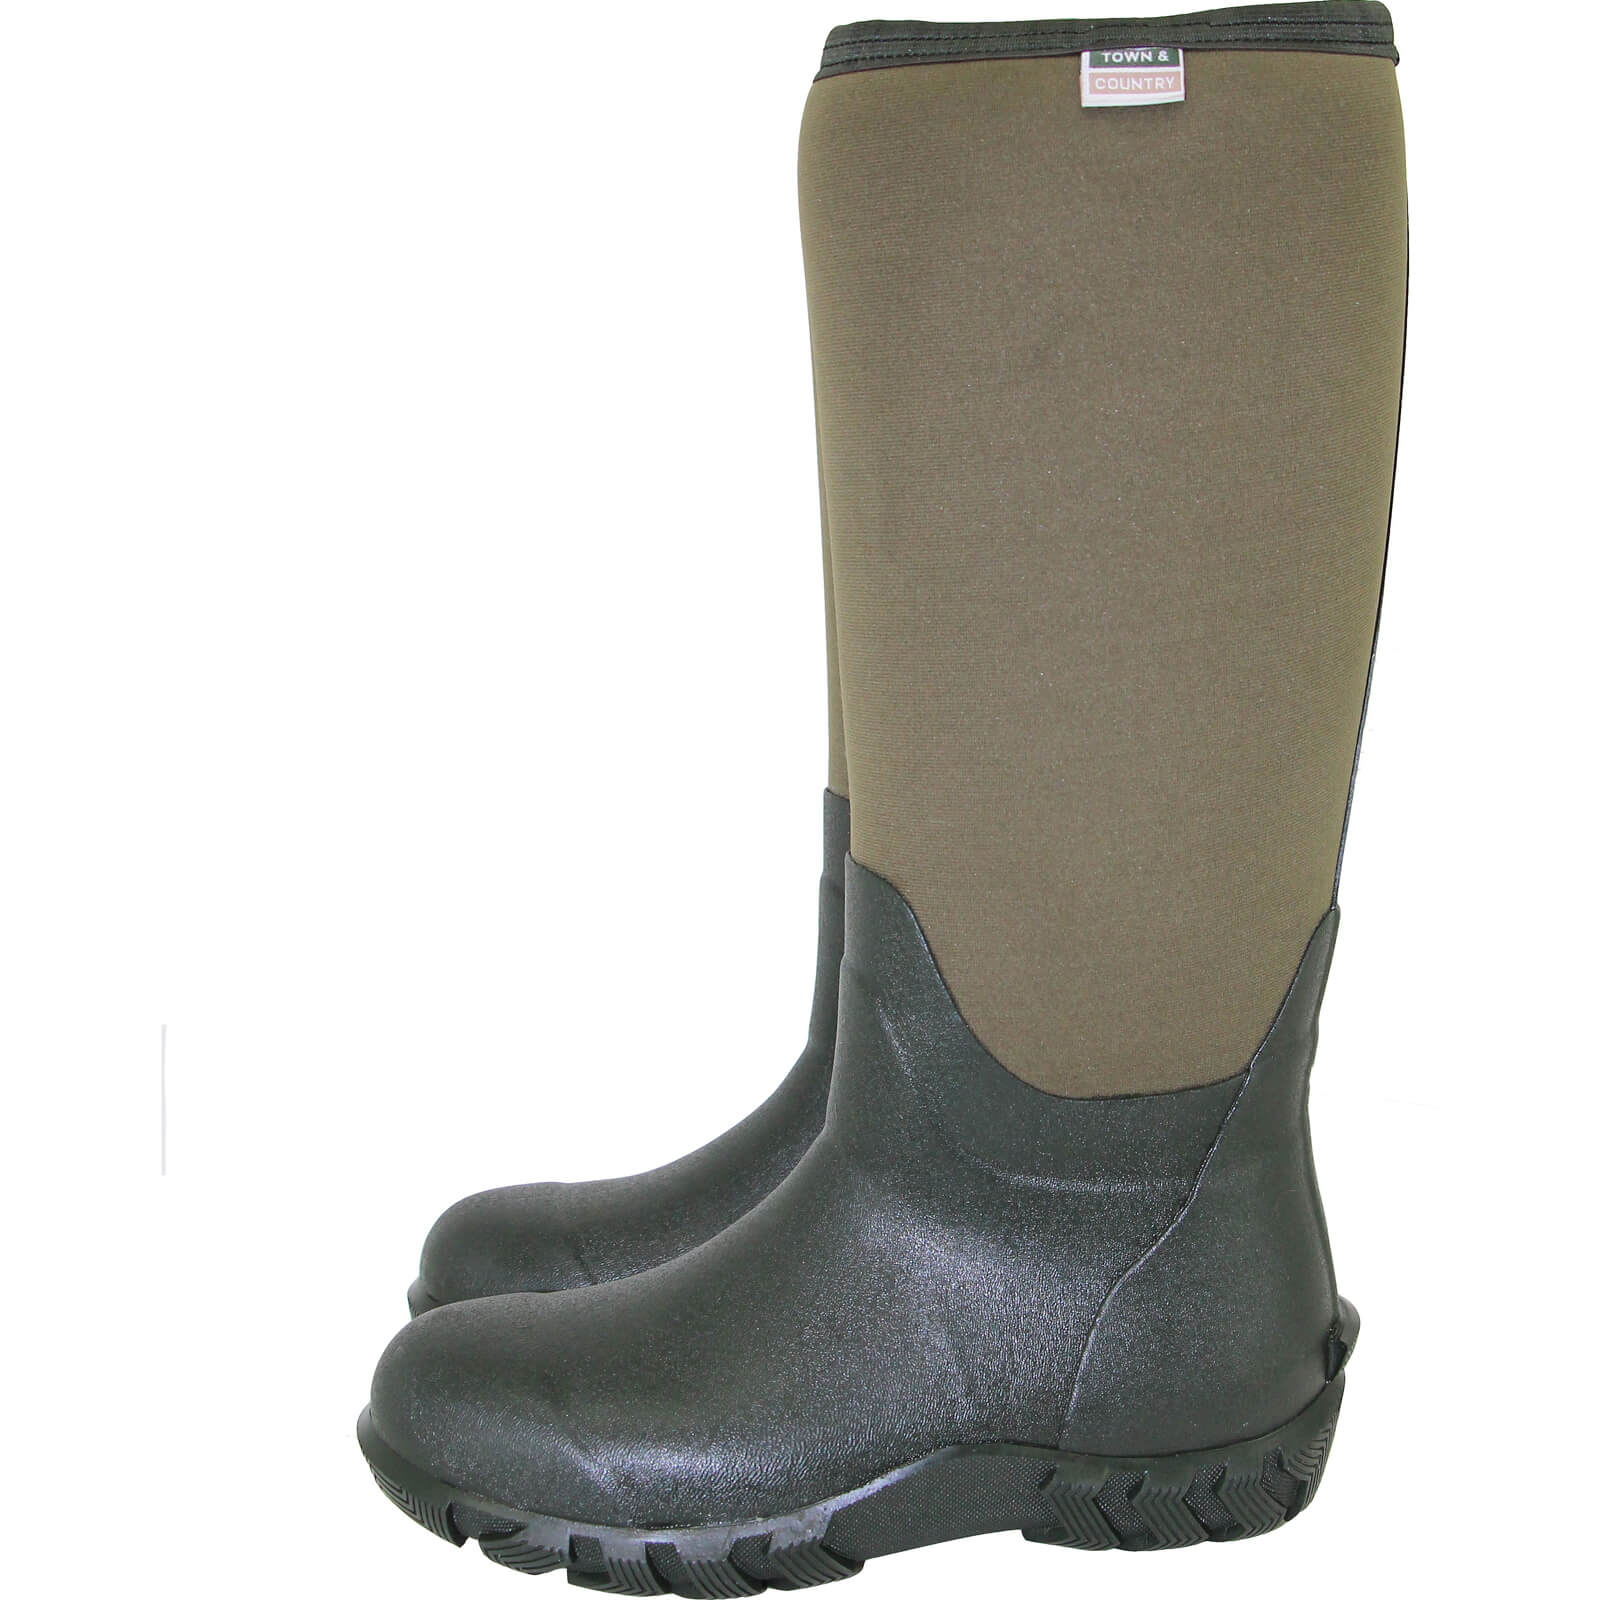 Image of Town and Country Buckingham Rubber Wellington Boots Green Size 4